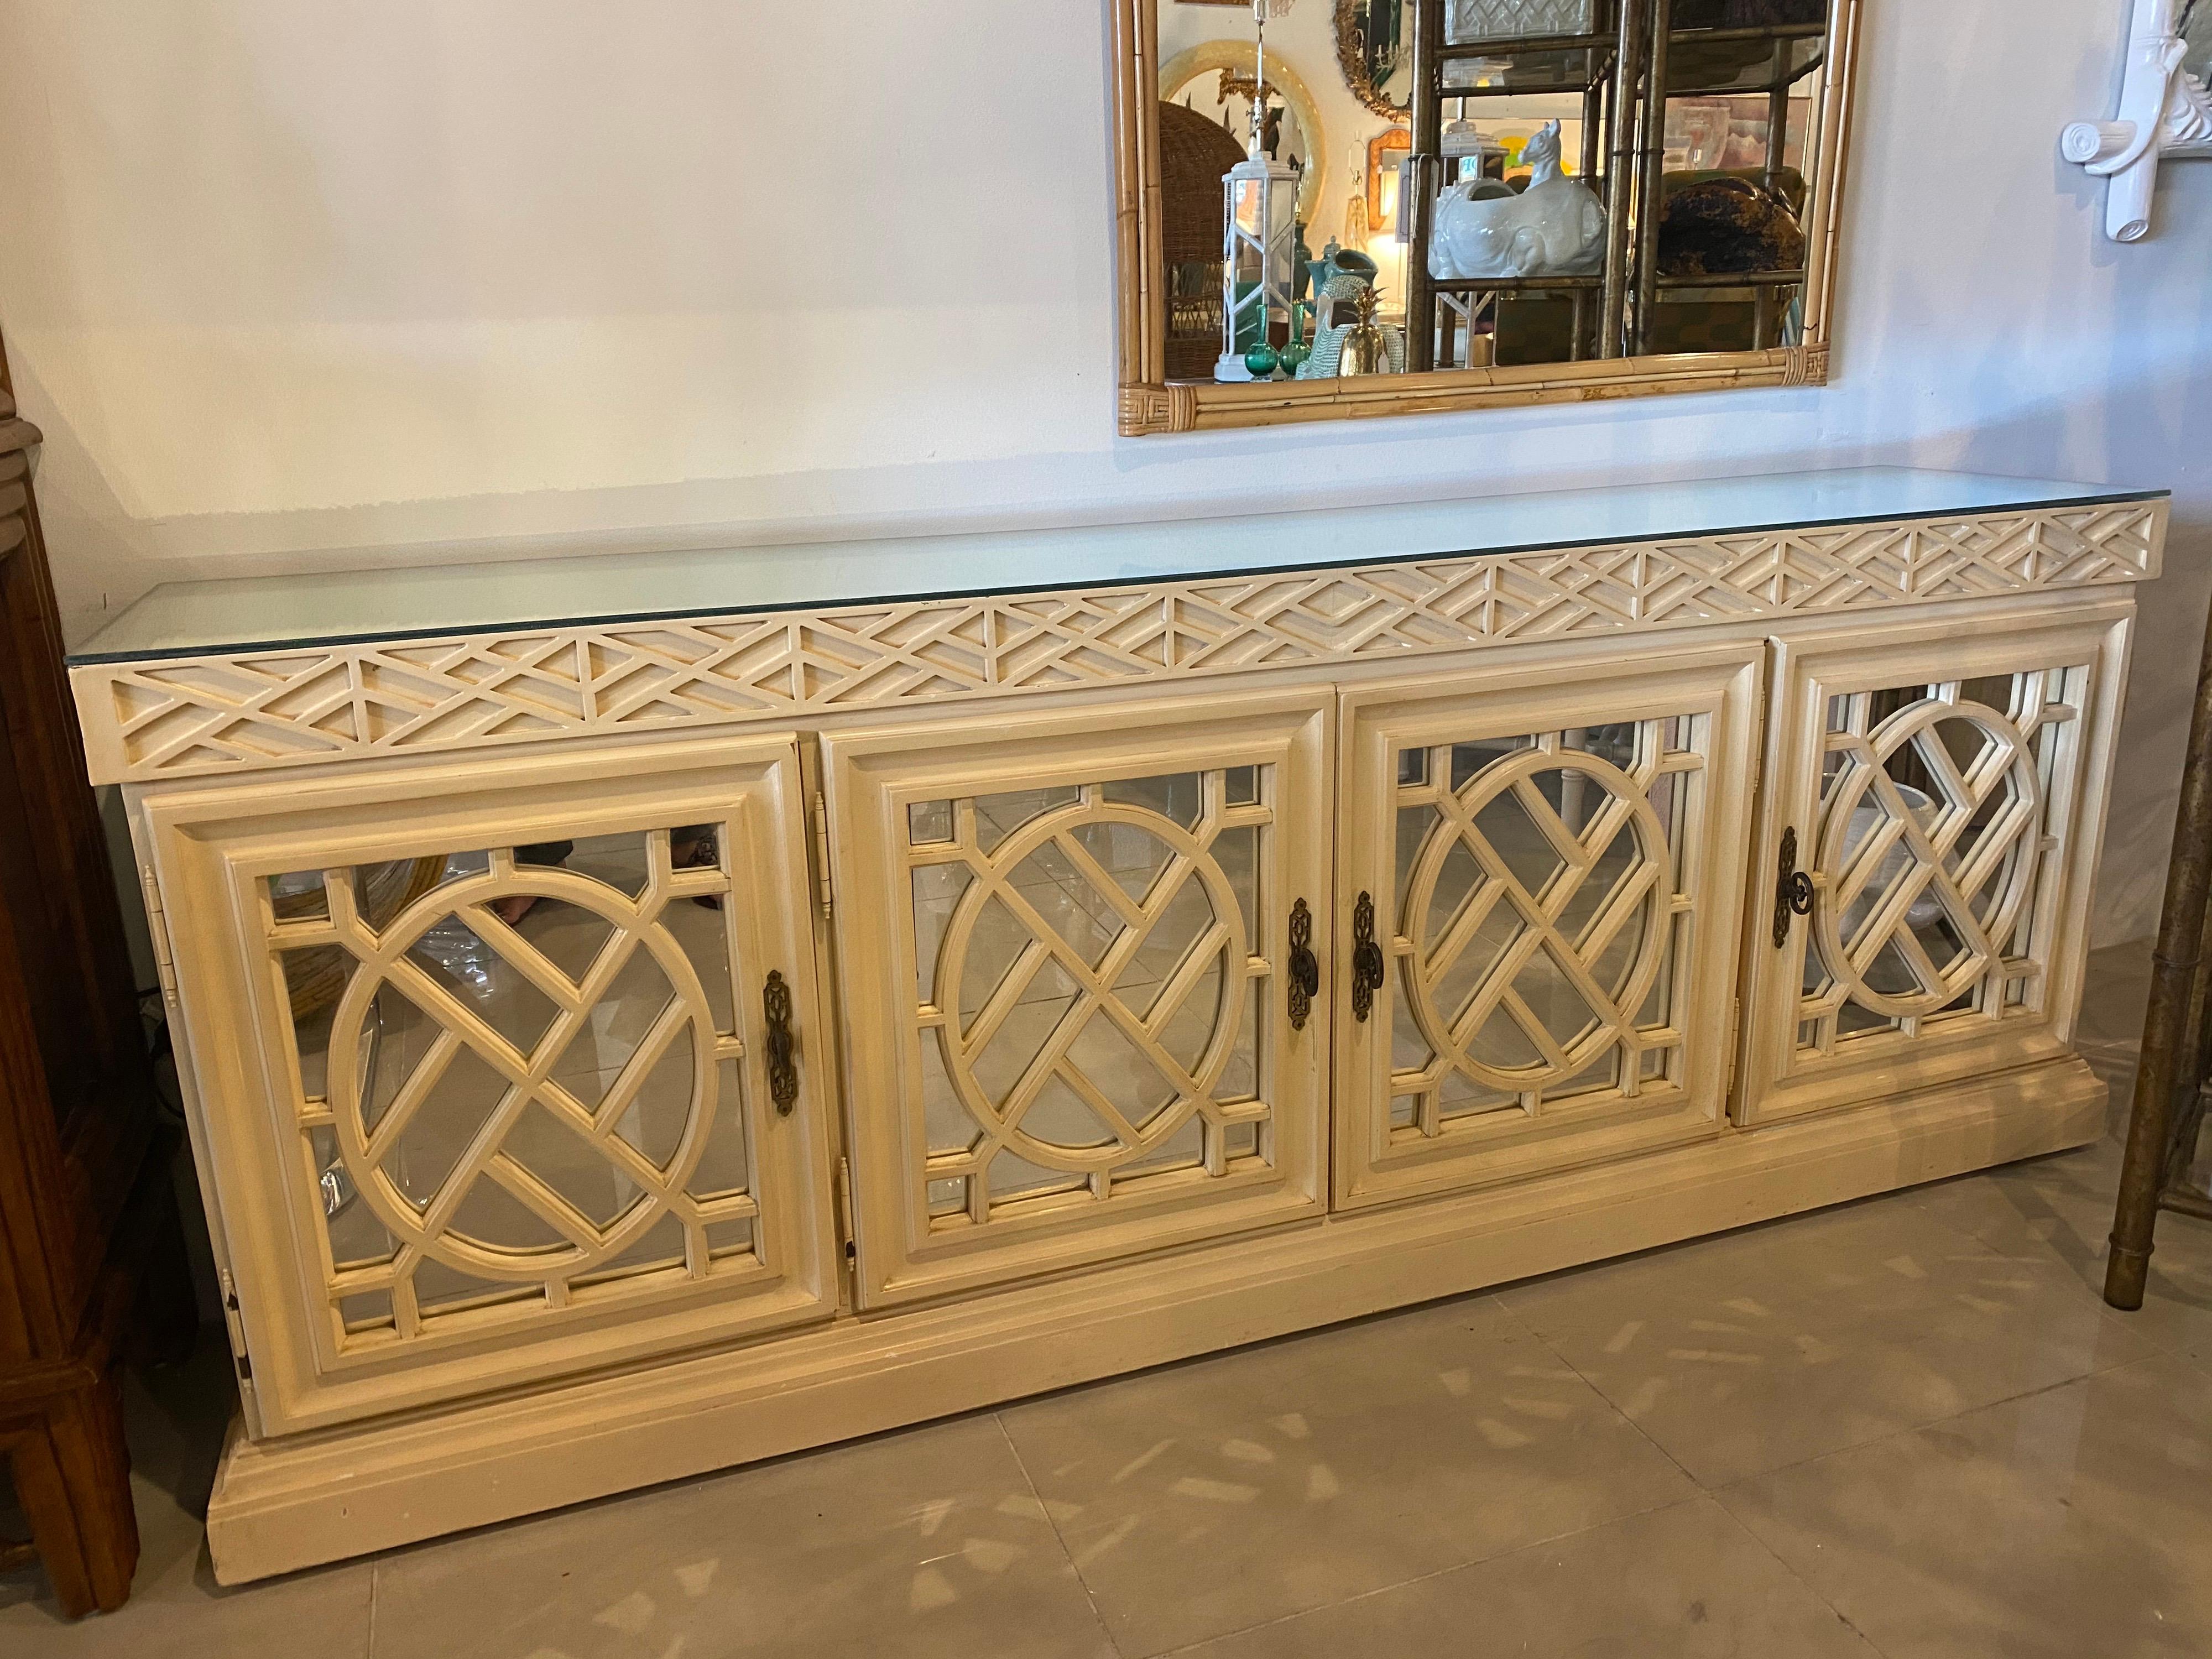 Vintage fretwork Chinese Chippendale mirrored credenza, cabinet, buffet, dresser. Removable mirror top. Doors open to reveal shelves and drawers (see pictures). This is in its original vintage finish so it will need paint, lacquer or re finishing as